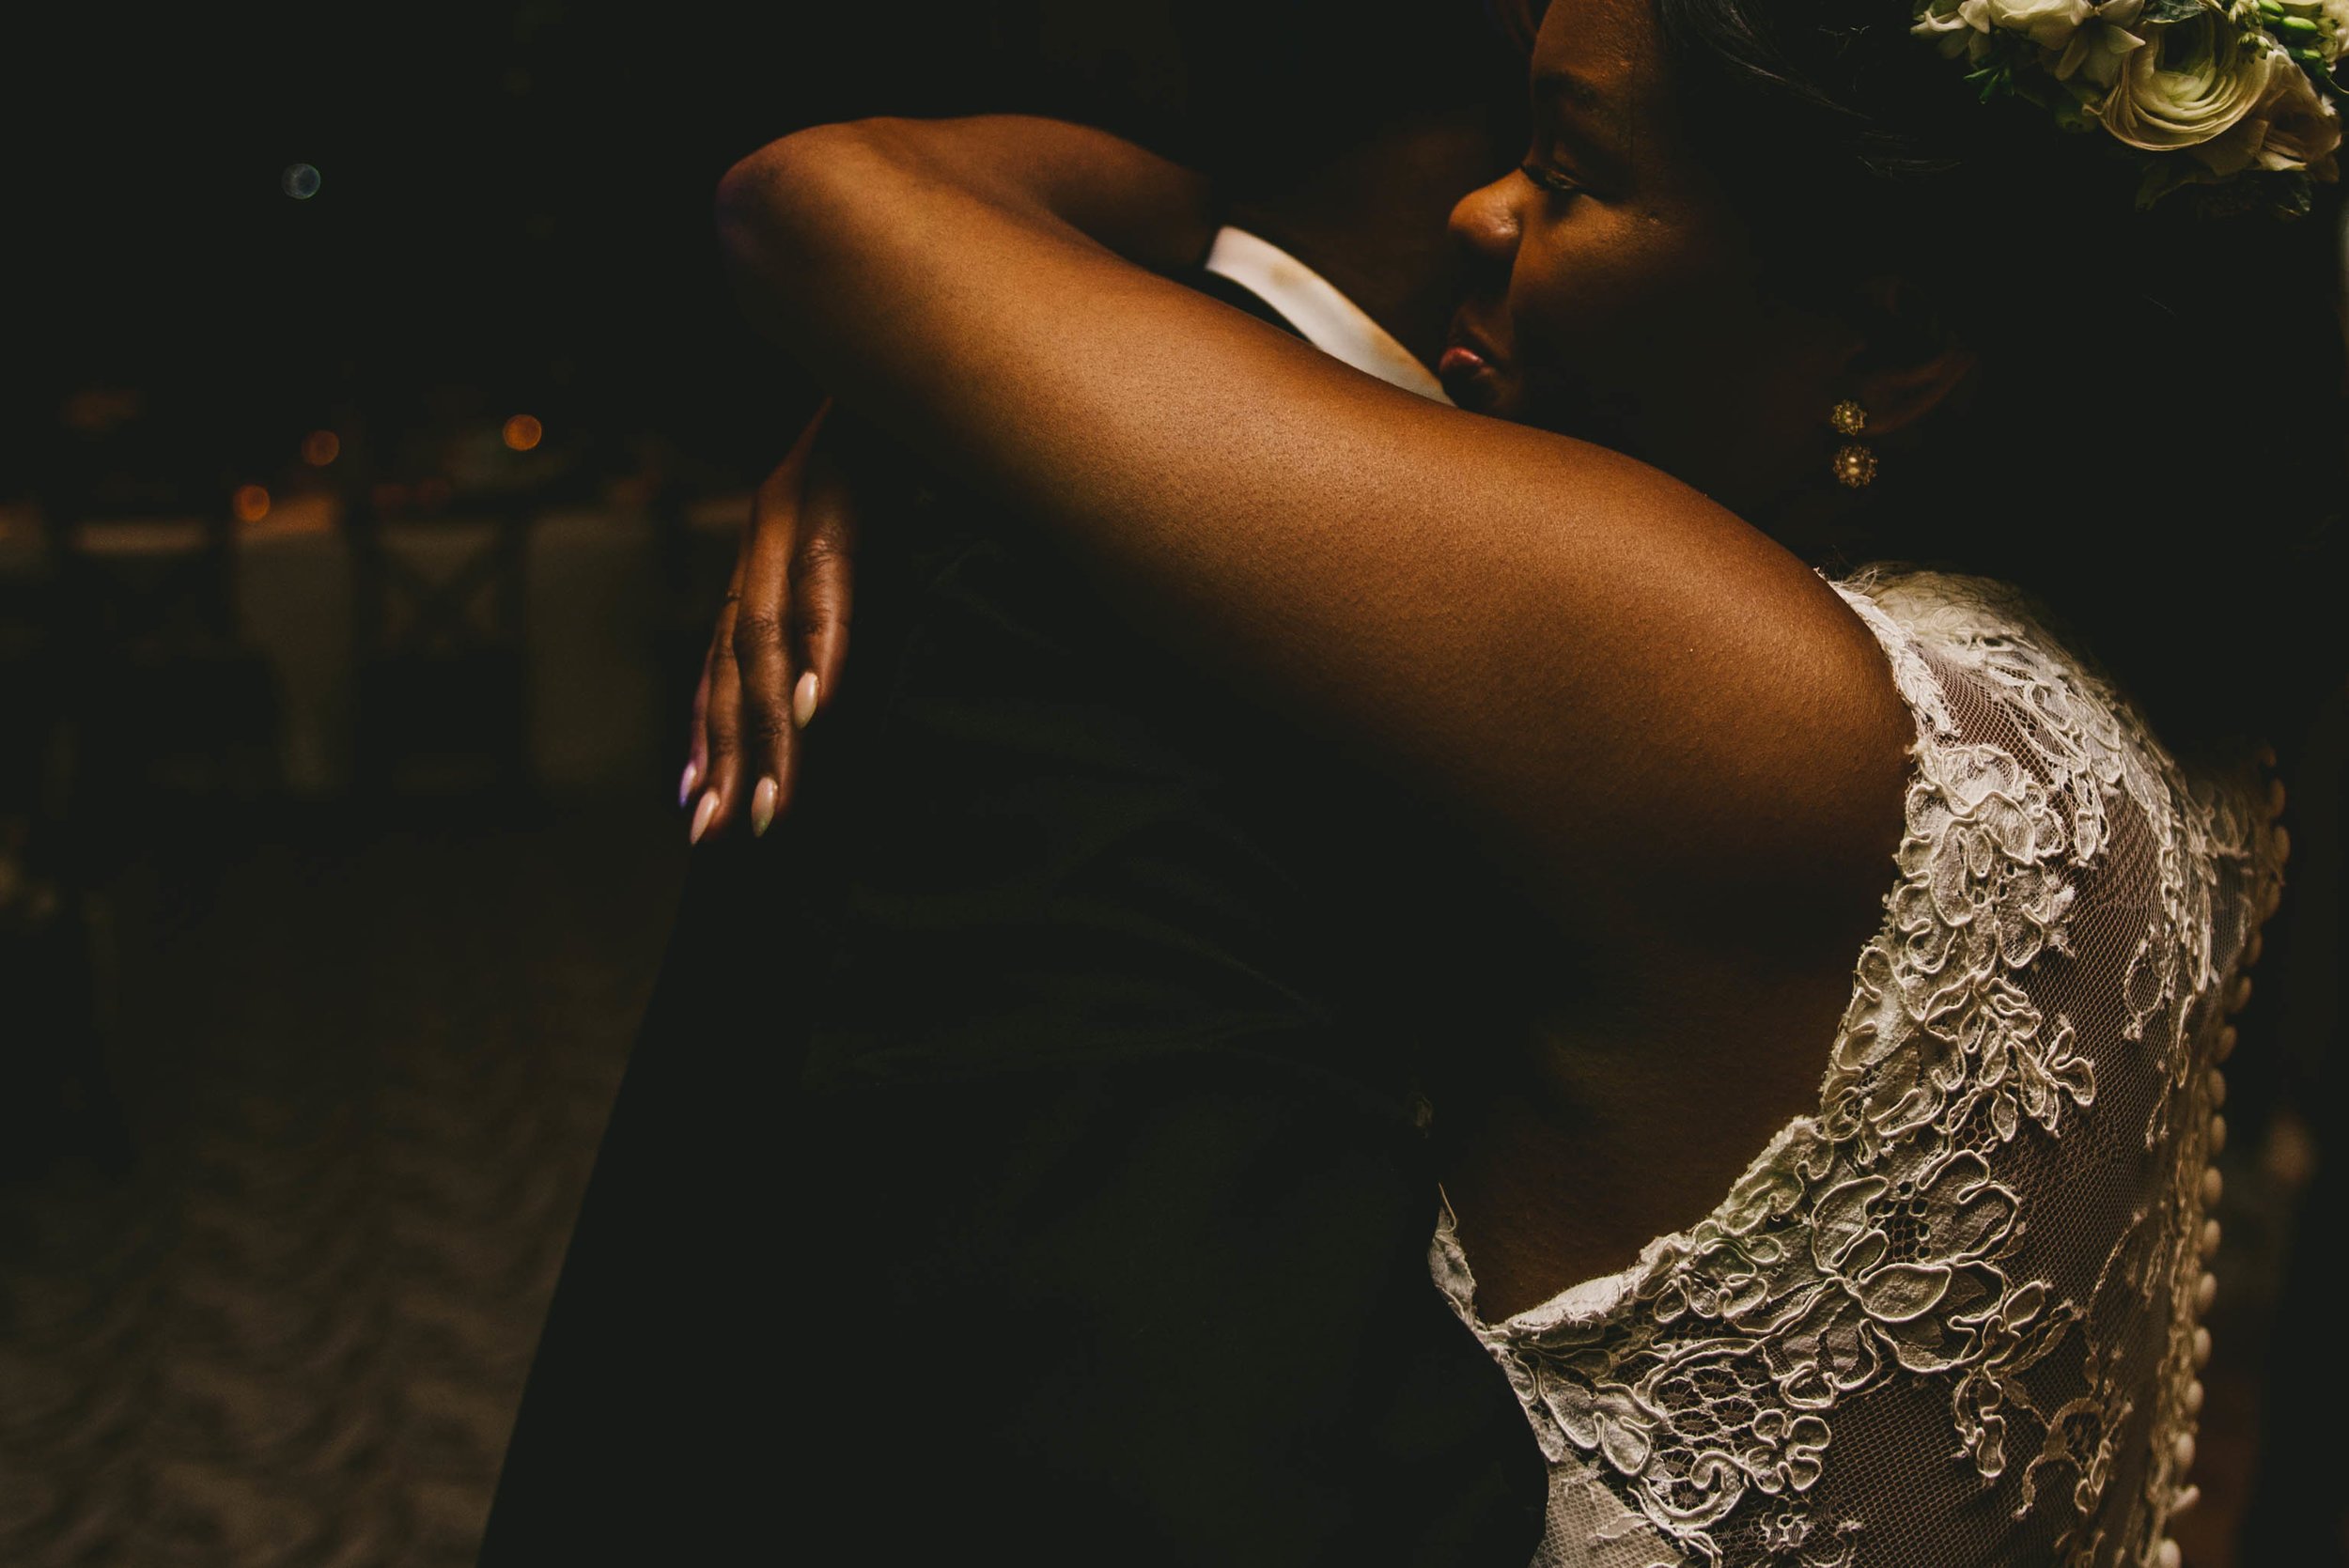 The bride and groom share a hug during their elegant Raleigh wedding